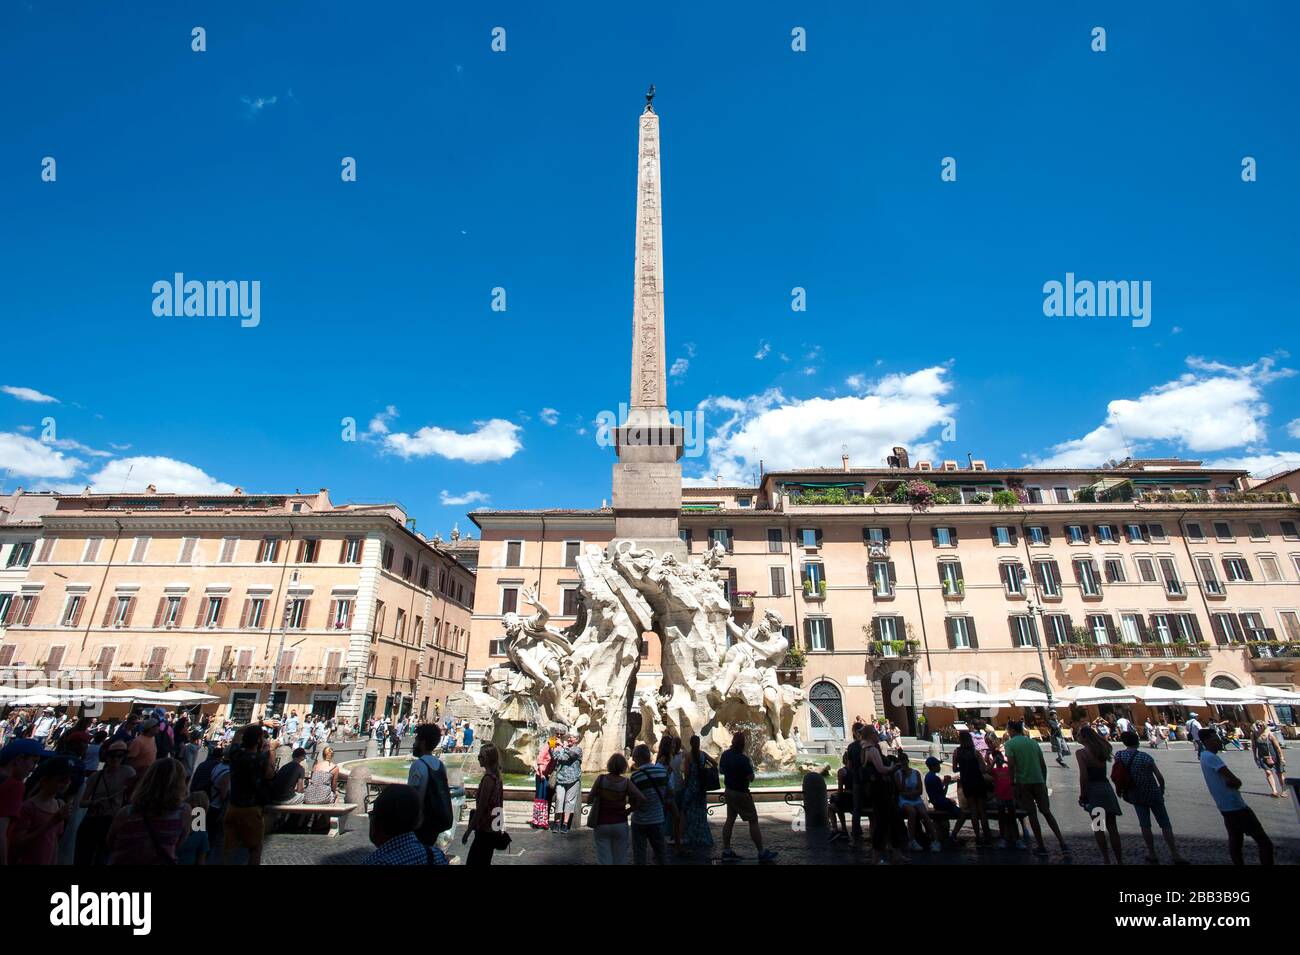 The Fountain of the Four Rivers (Fontana dei Quattro Fiumi) and egyptian obelisk in the Piazza Navona, Rome, Italy Stock Photo